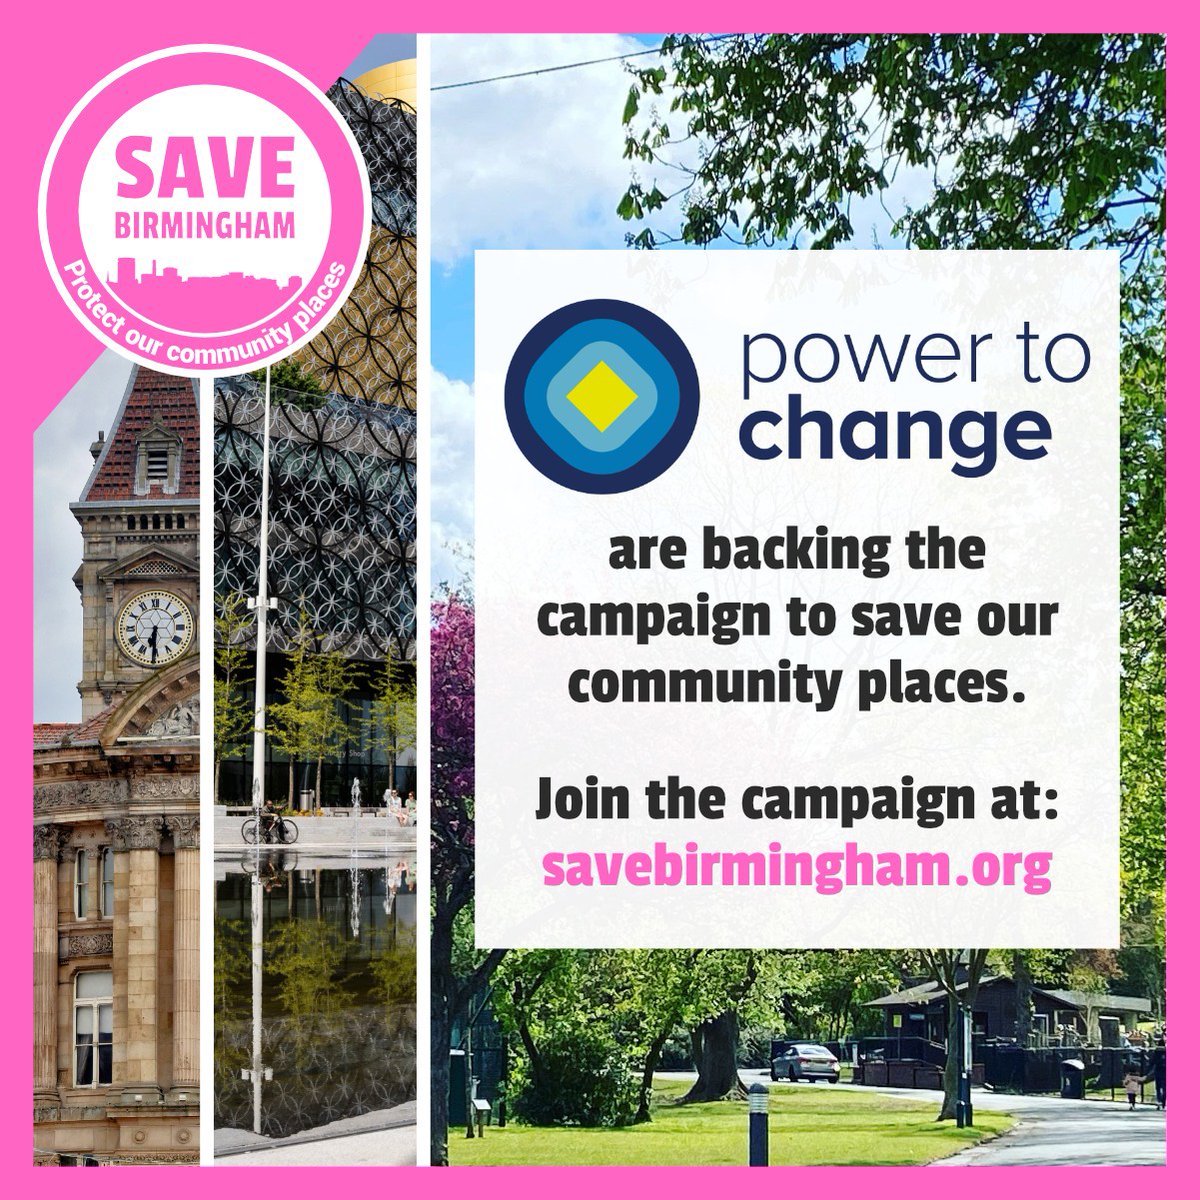 Making places thrive and strengthening communities through community business is what @peoplesbiz is all about. So we are thrilled that this powerhouse org is backing the #SaveBirmingham campaign. Find out how you can get involved at savebirmingham.org